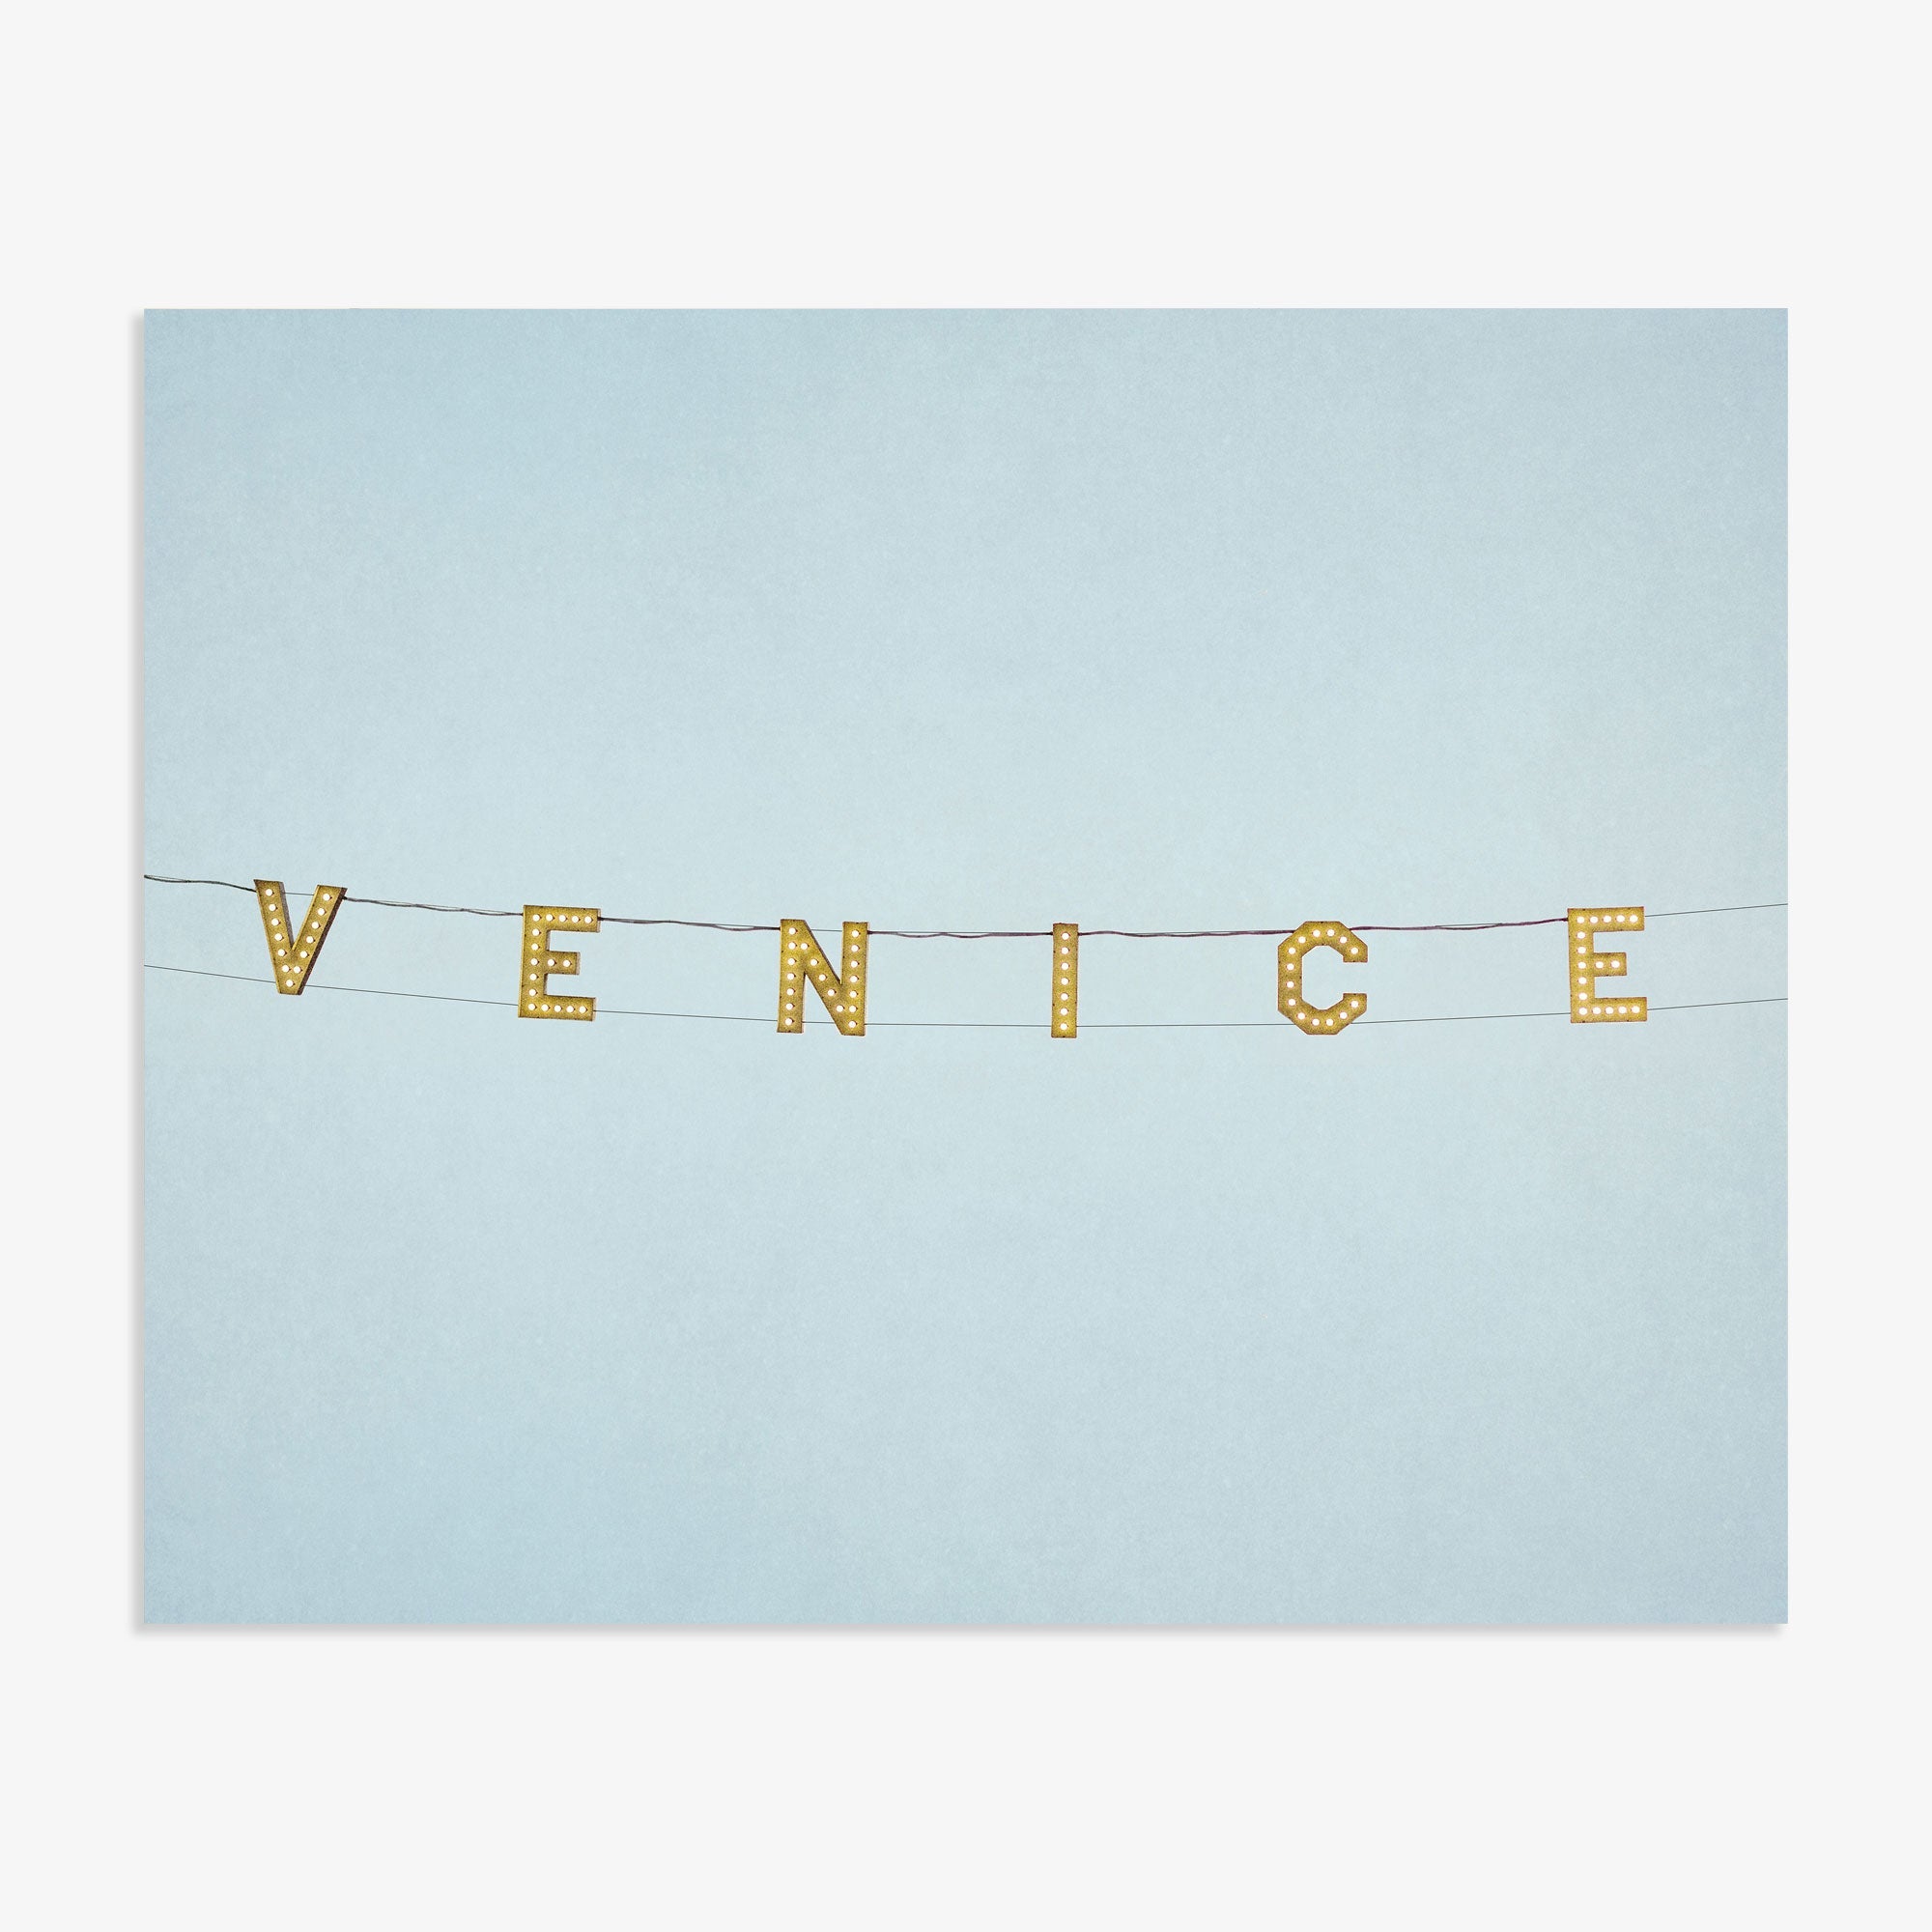 A minimalist representation with the Venice Beach Sign Print, &#39;Blue Venice&#39; spelled out in yellow letters on small flags strung across a plain light blue background, printed on archival photographic paper by Offley Green.